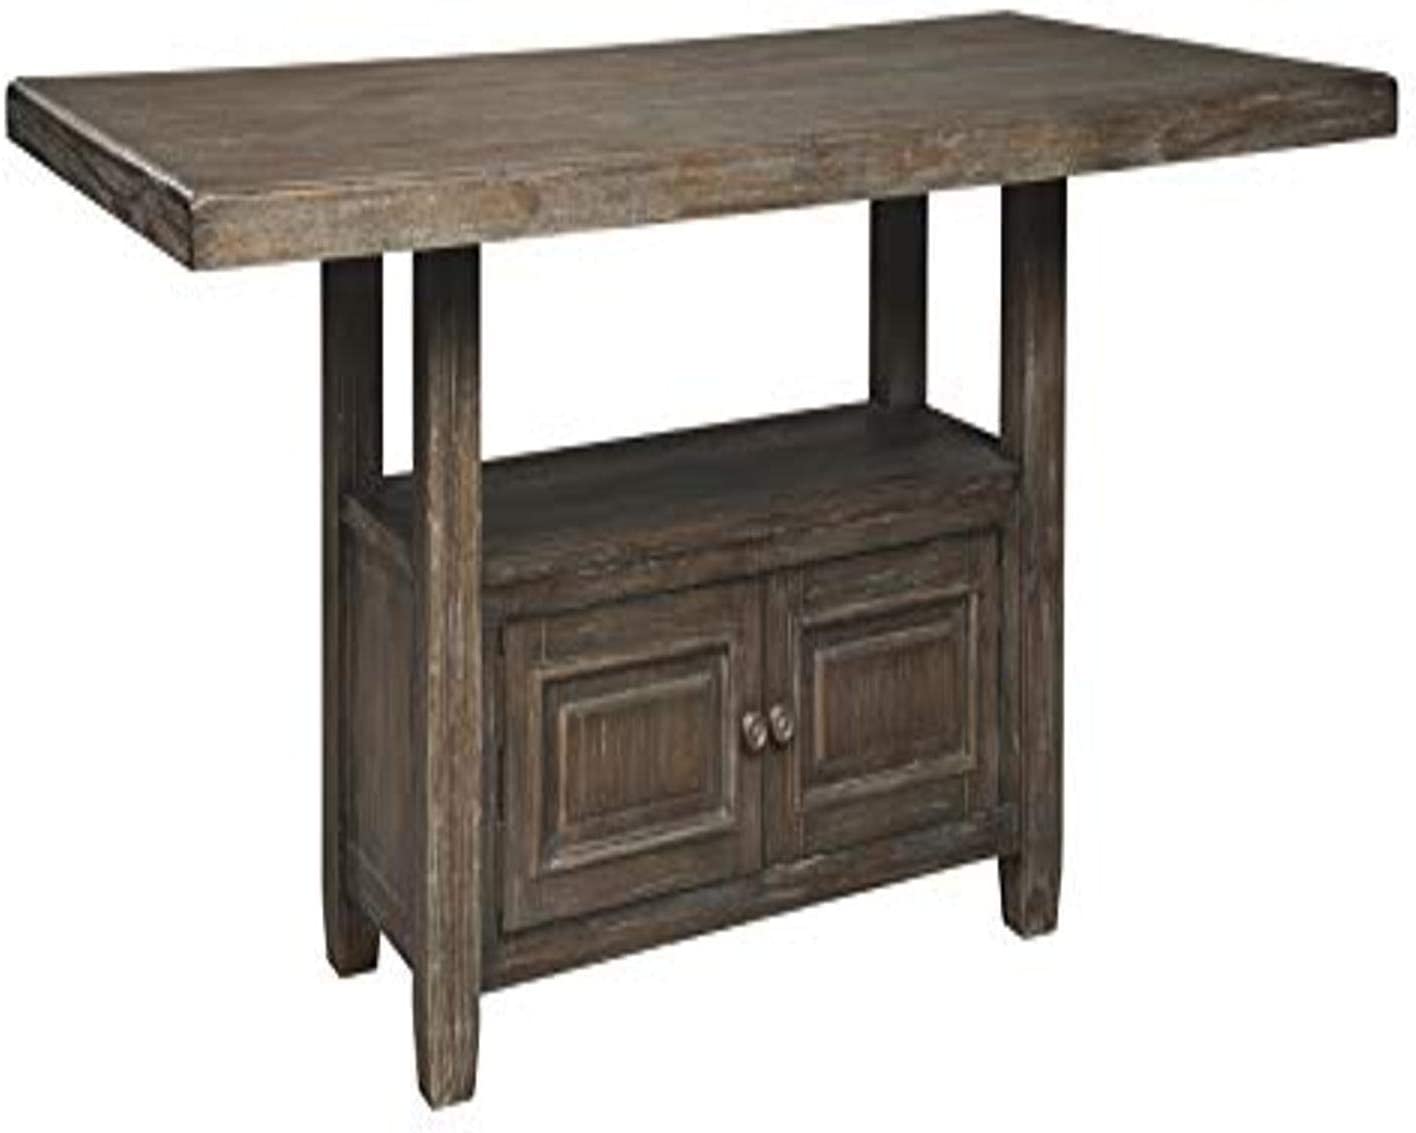 B07SLNQLH5 Signature Design by Ashley Wyndahl Counter Height Dining Room Table, Rustic Brown